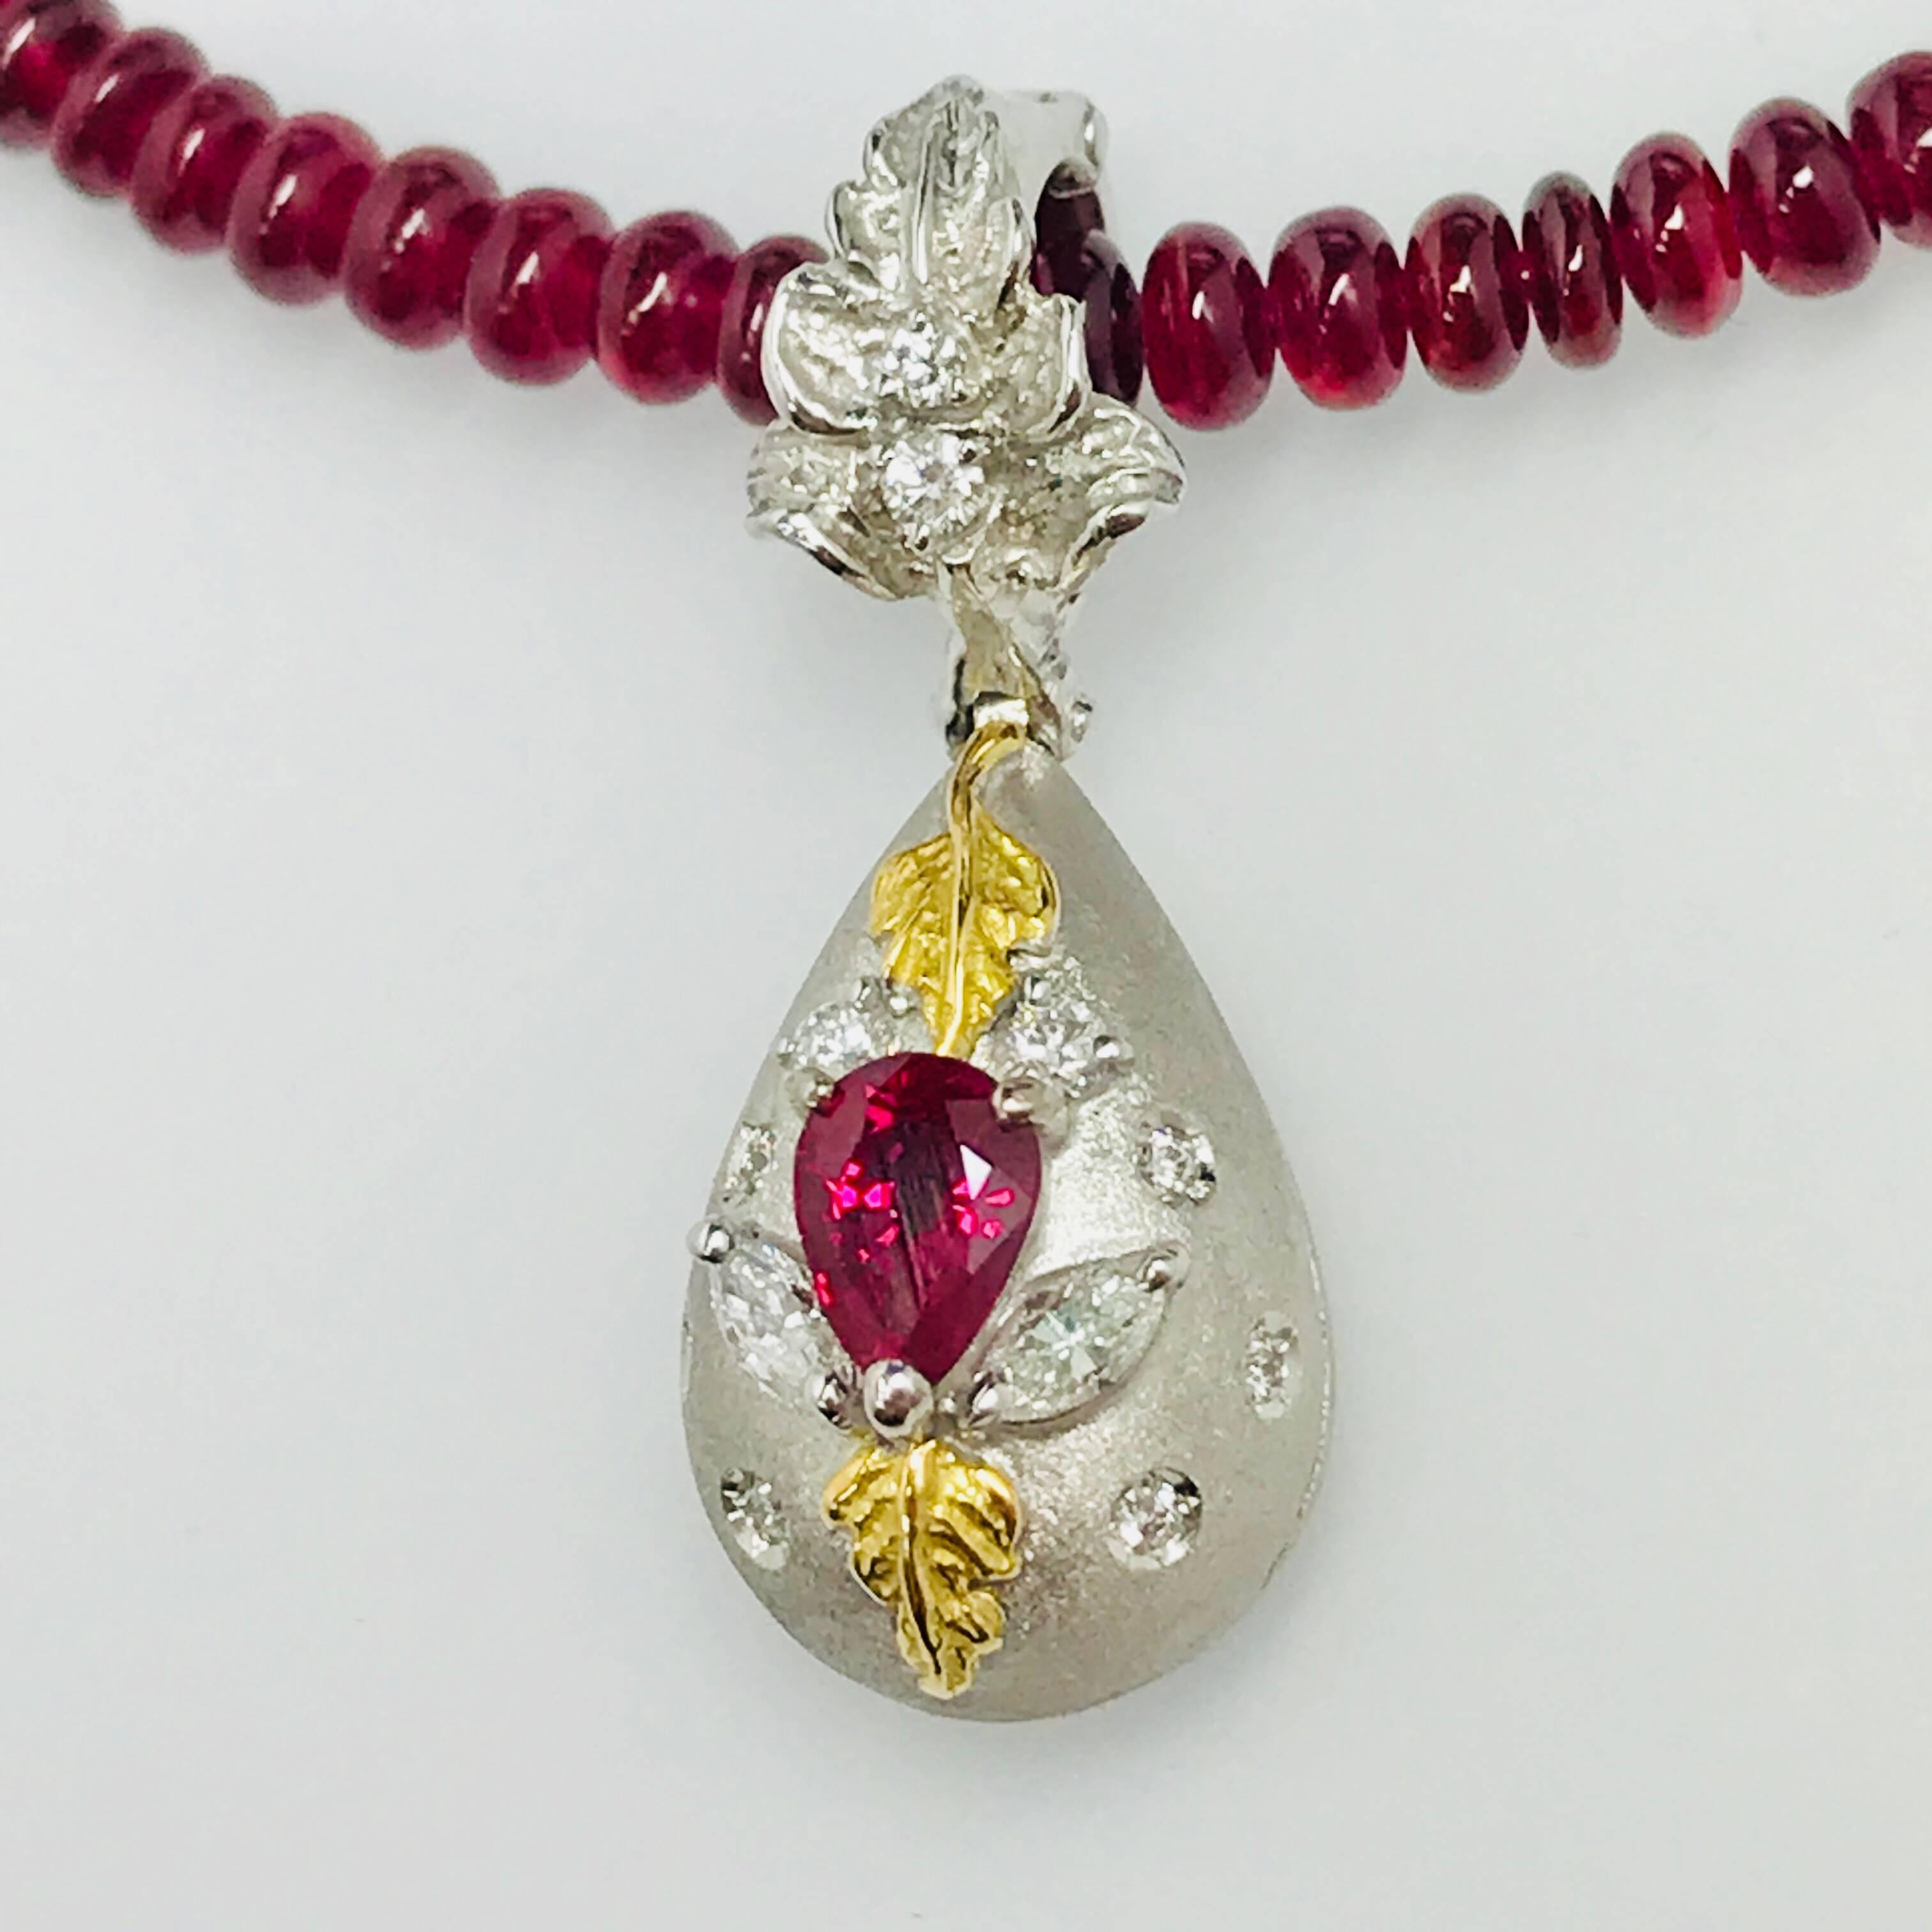 ruby beads necklace with pendant